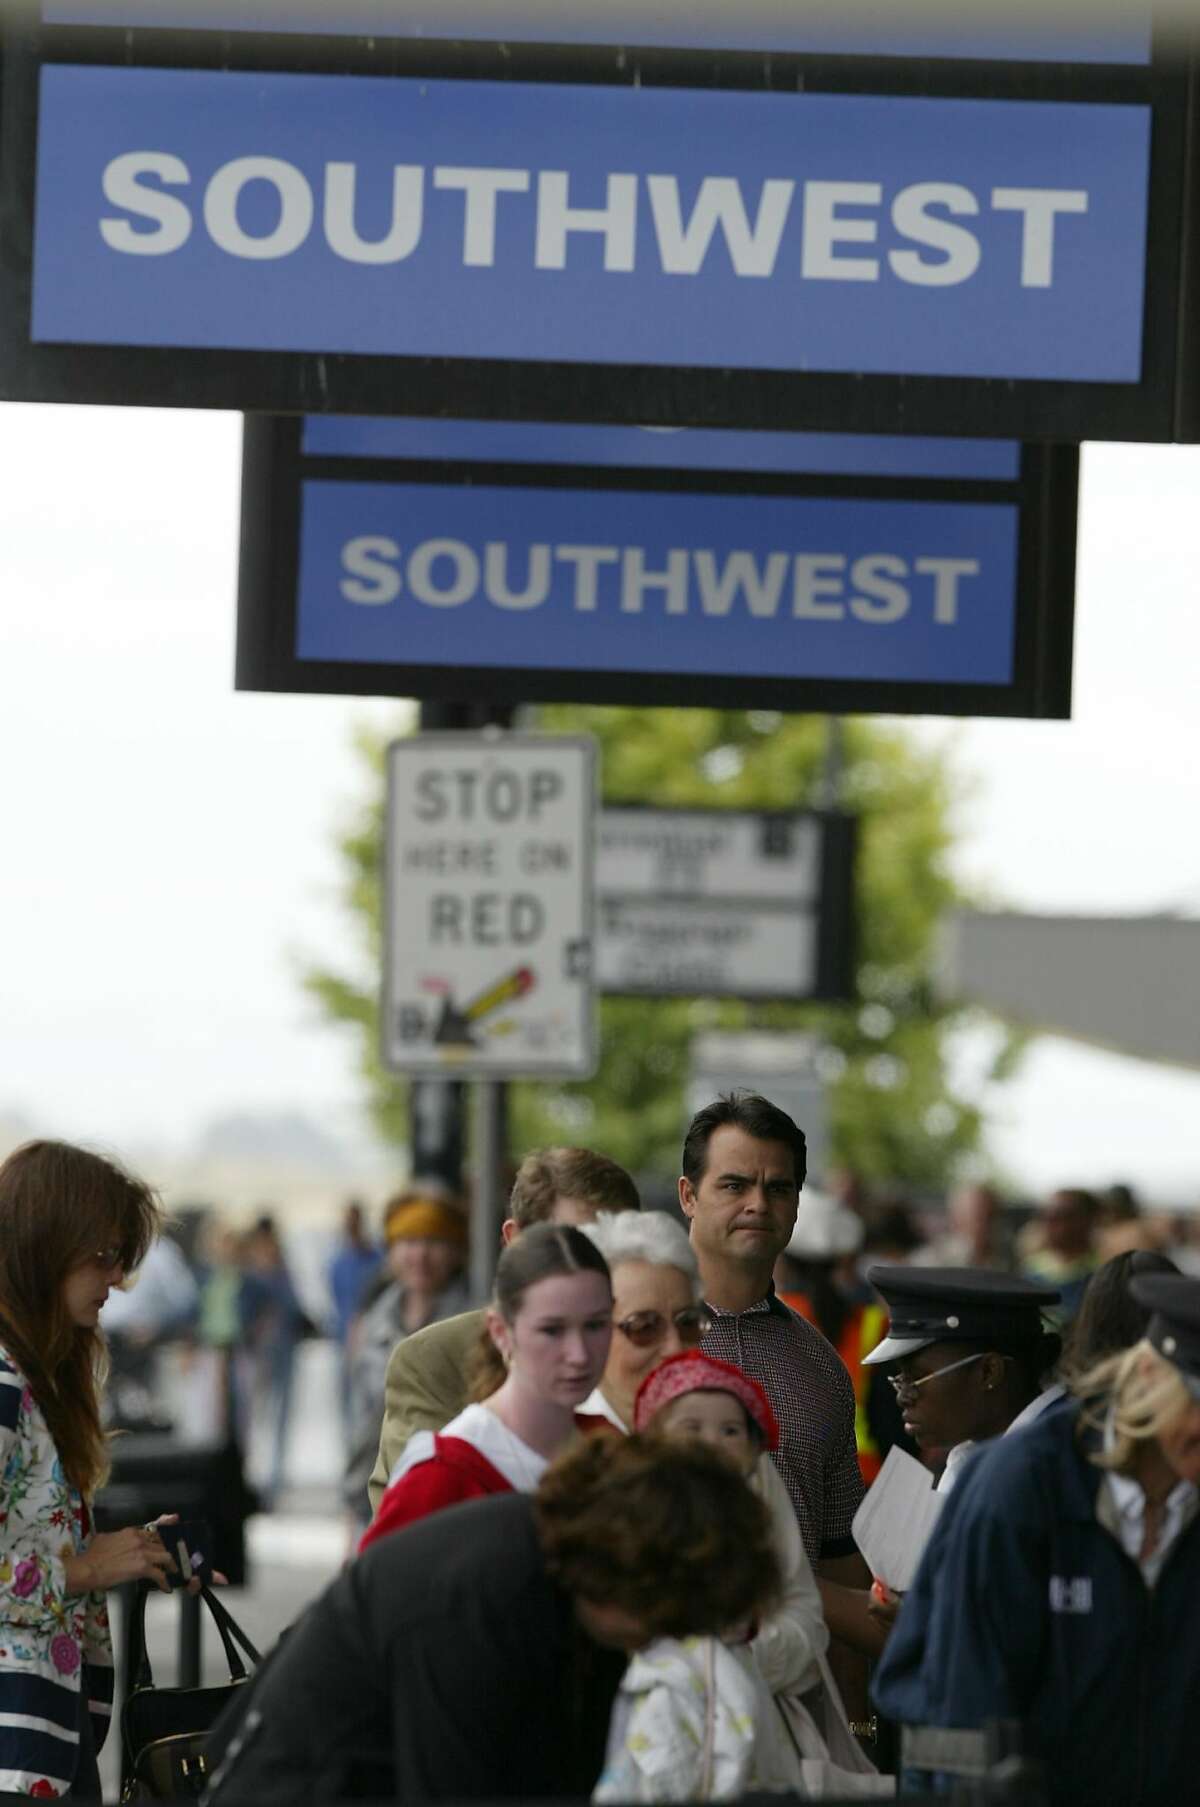 The SouthWest airline expansion of Terminal Two at the Oakland Airport. SOUTHWEST-kr008.JPG 6/4/04 in Oakland,CA. Kurt Rogers/The Chronicle Southwest Airlines has become so popular at Oakland International Airport, above, that the airport is remodeling and expanding Terminal 2, left, to accommodate the successful low-cost carrier that accounts for 60 percent of its flights and passengers.